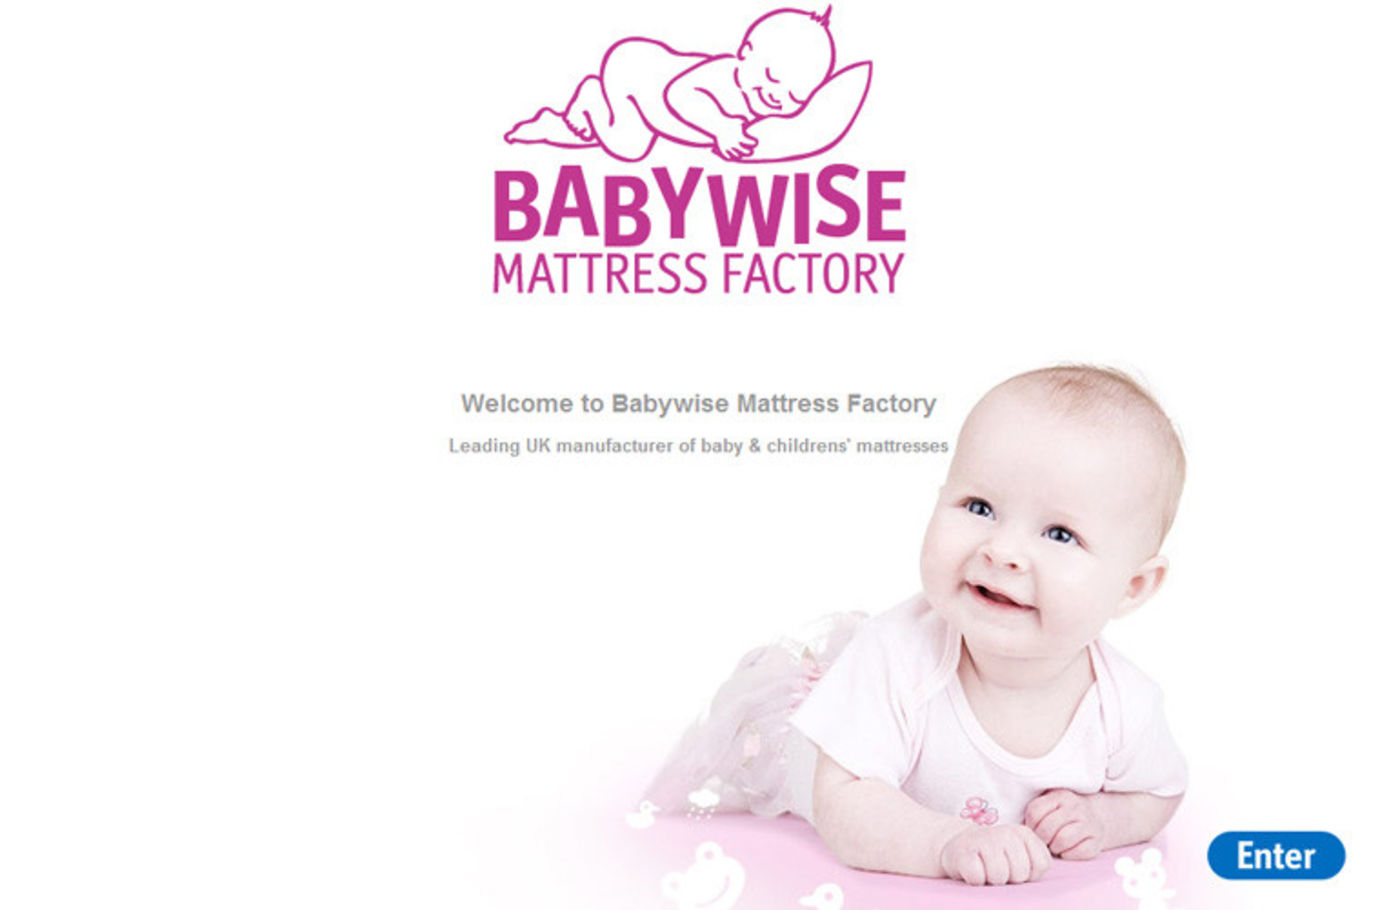 Babywise Mattress Factory (2008) Welcome